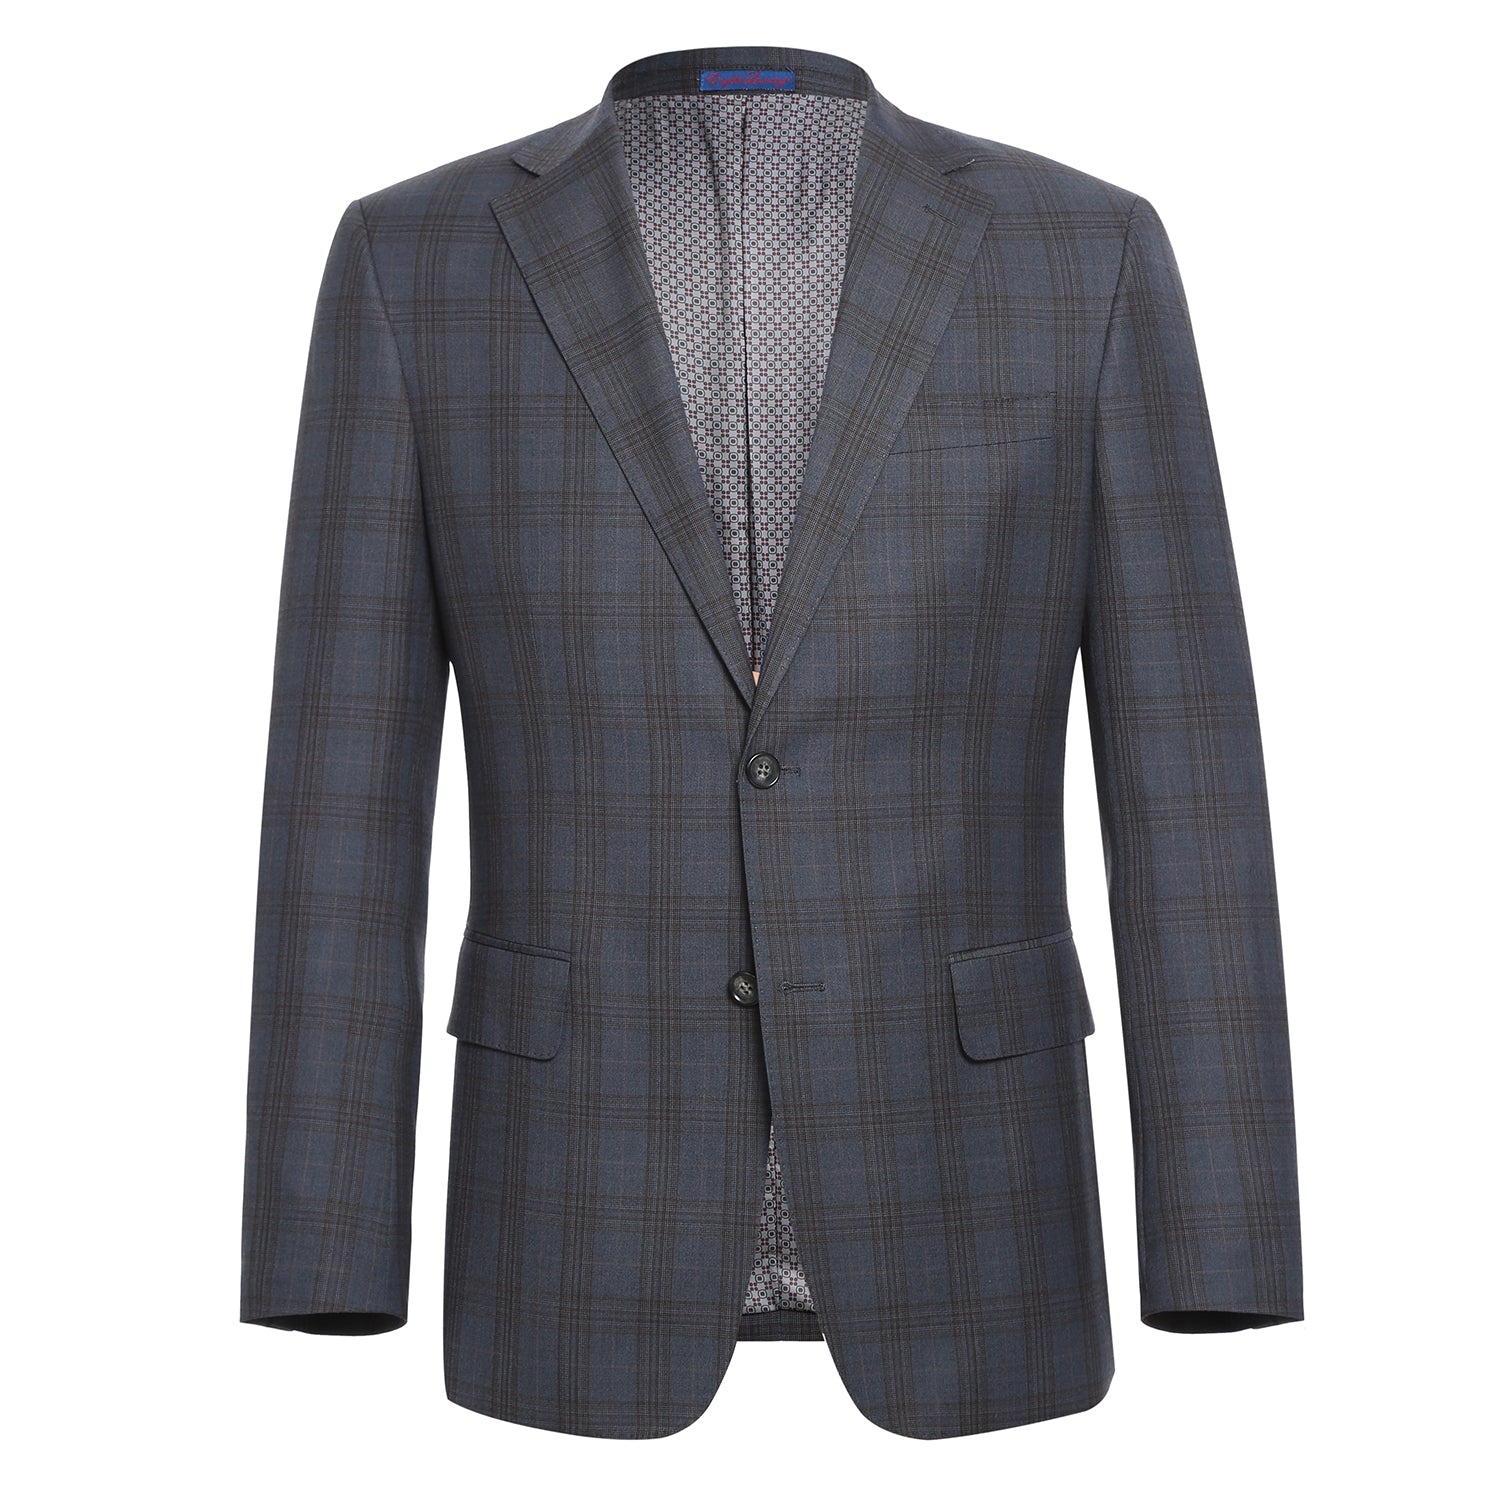 English Laundry Gray with Tan Check Notch Suit 2